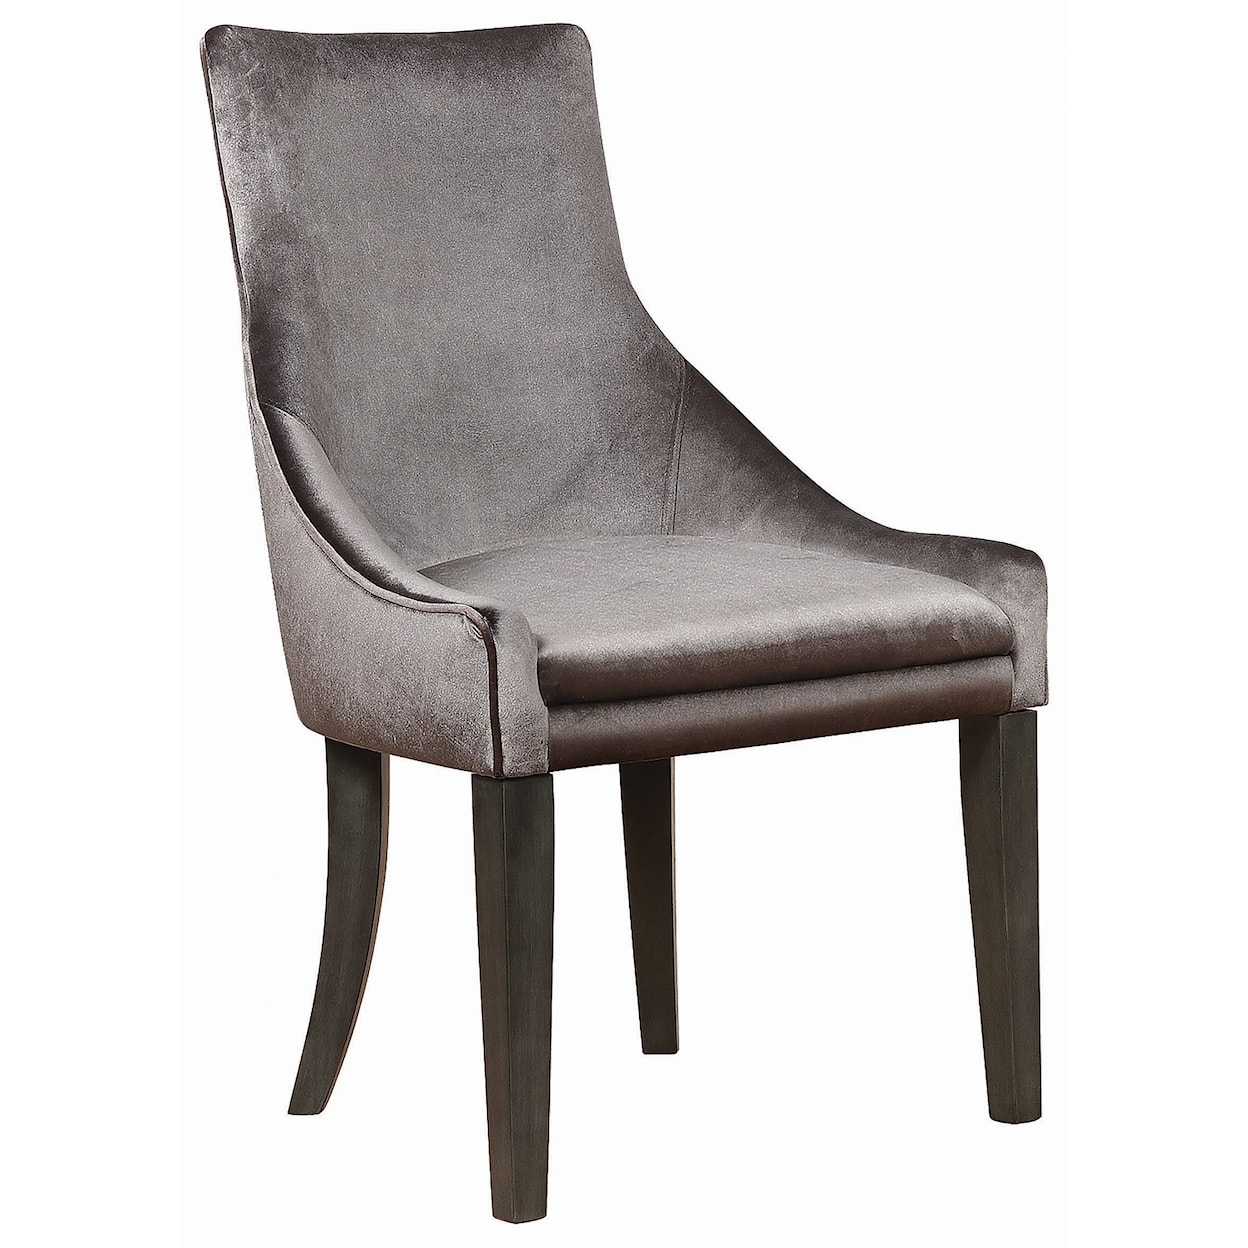 Coaster Phelps Upholstered Side Chair